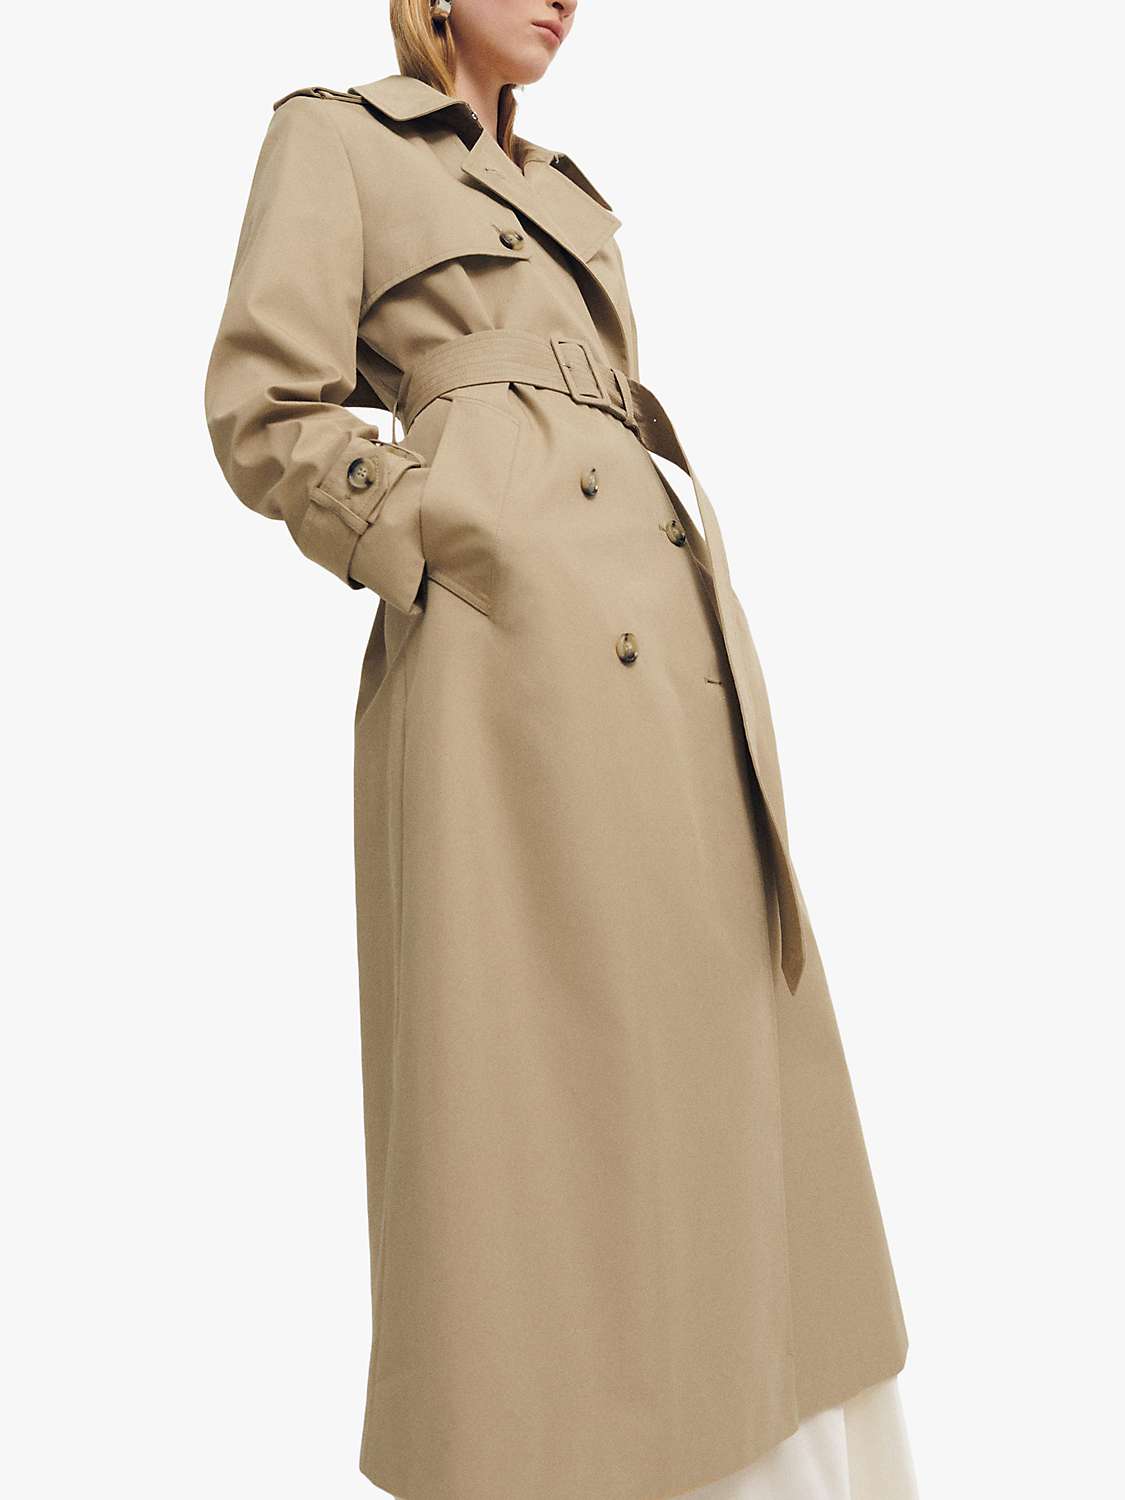 Buy Mango Eiffel Double Breasted Cotton Blend Trench Coat, Light Beige Online at johnlewis.com